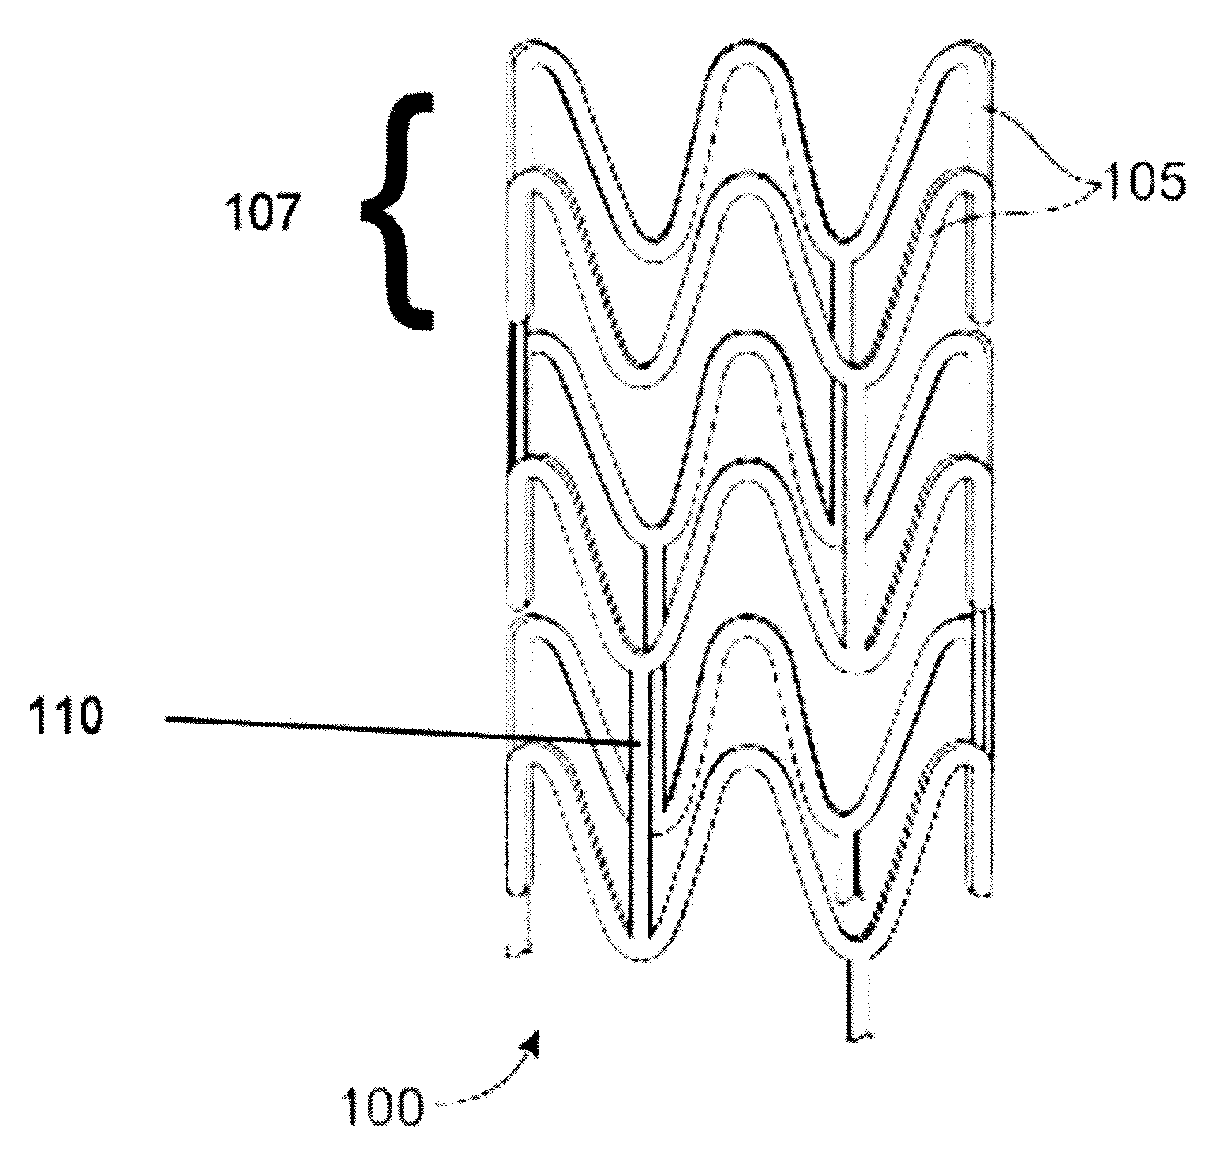 Bioabsorbable Scaffold With Particles Providing Delayed Acceleration of Degradation